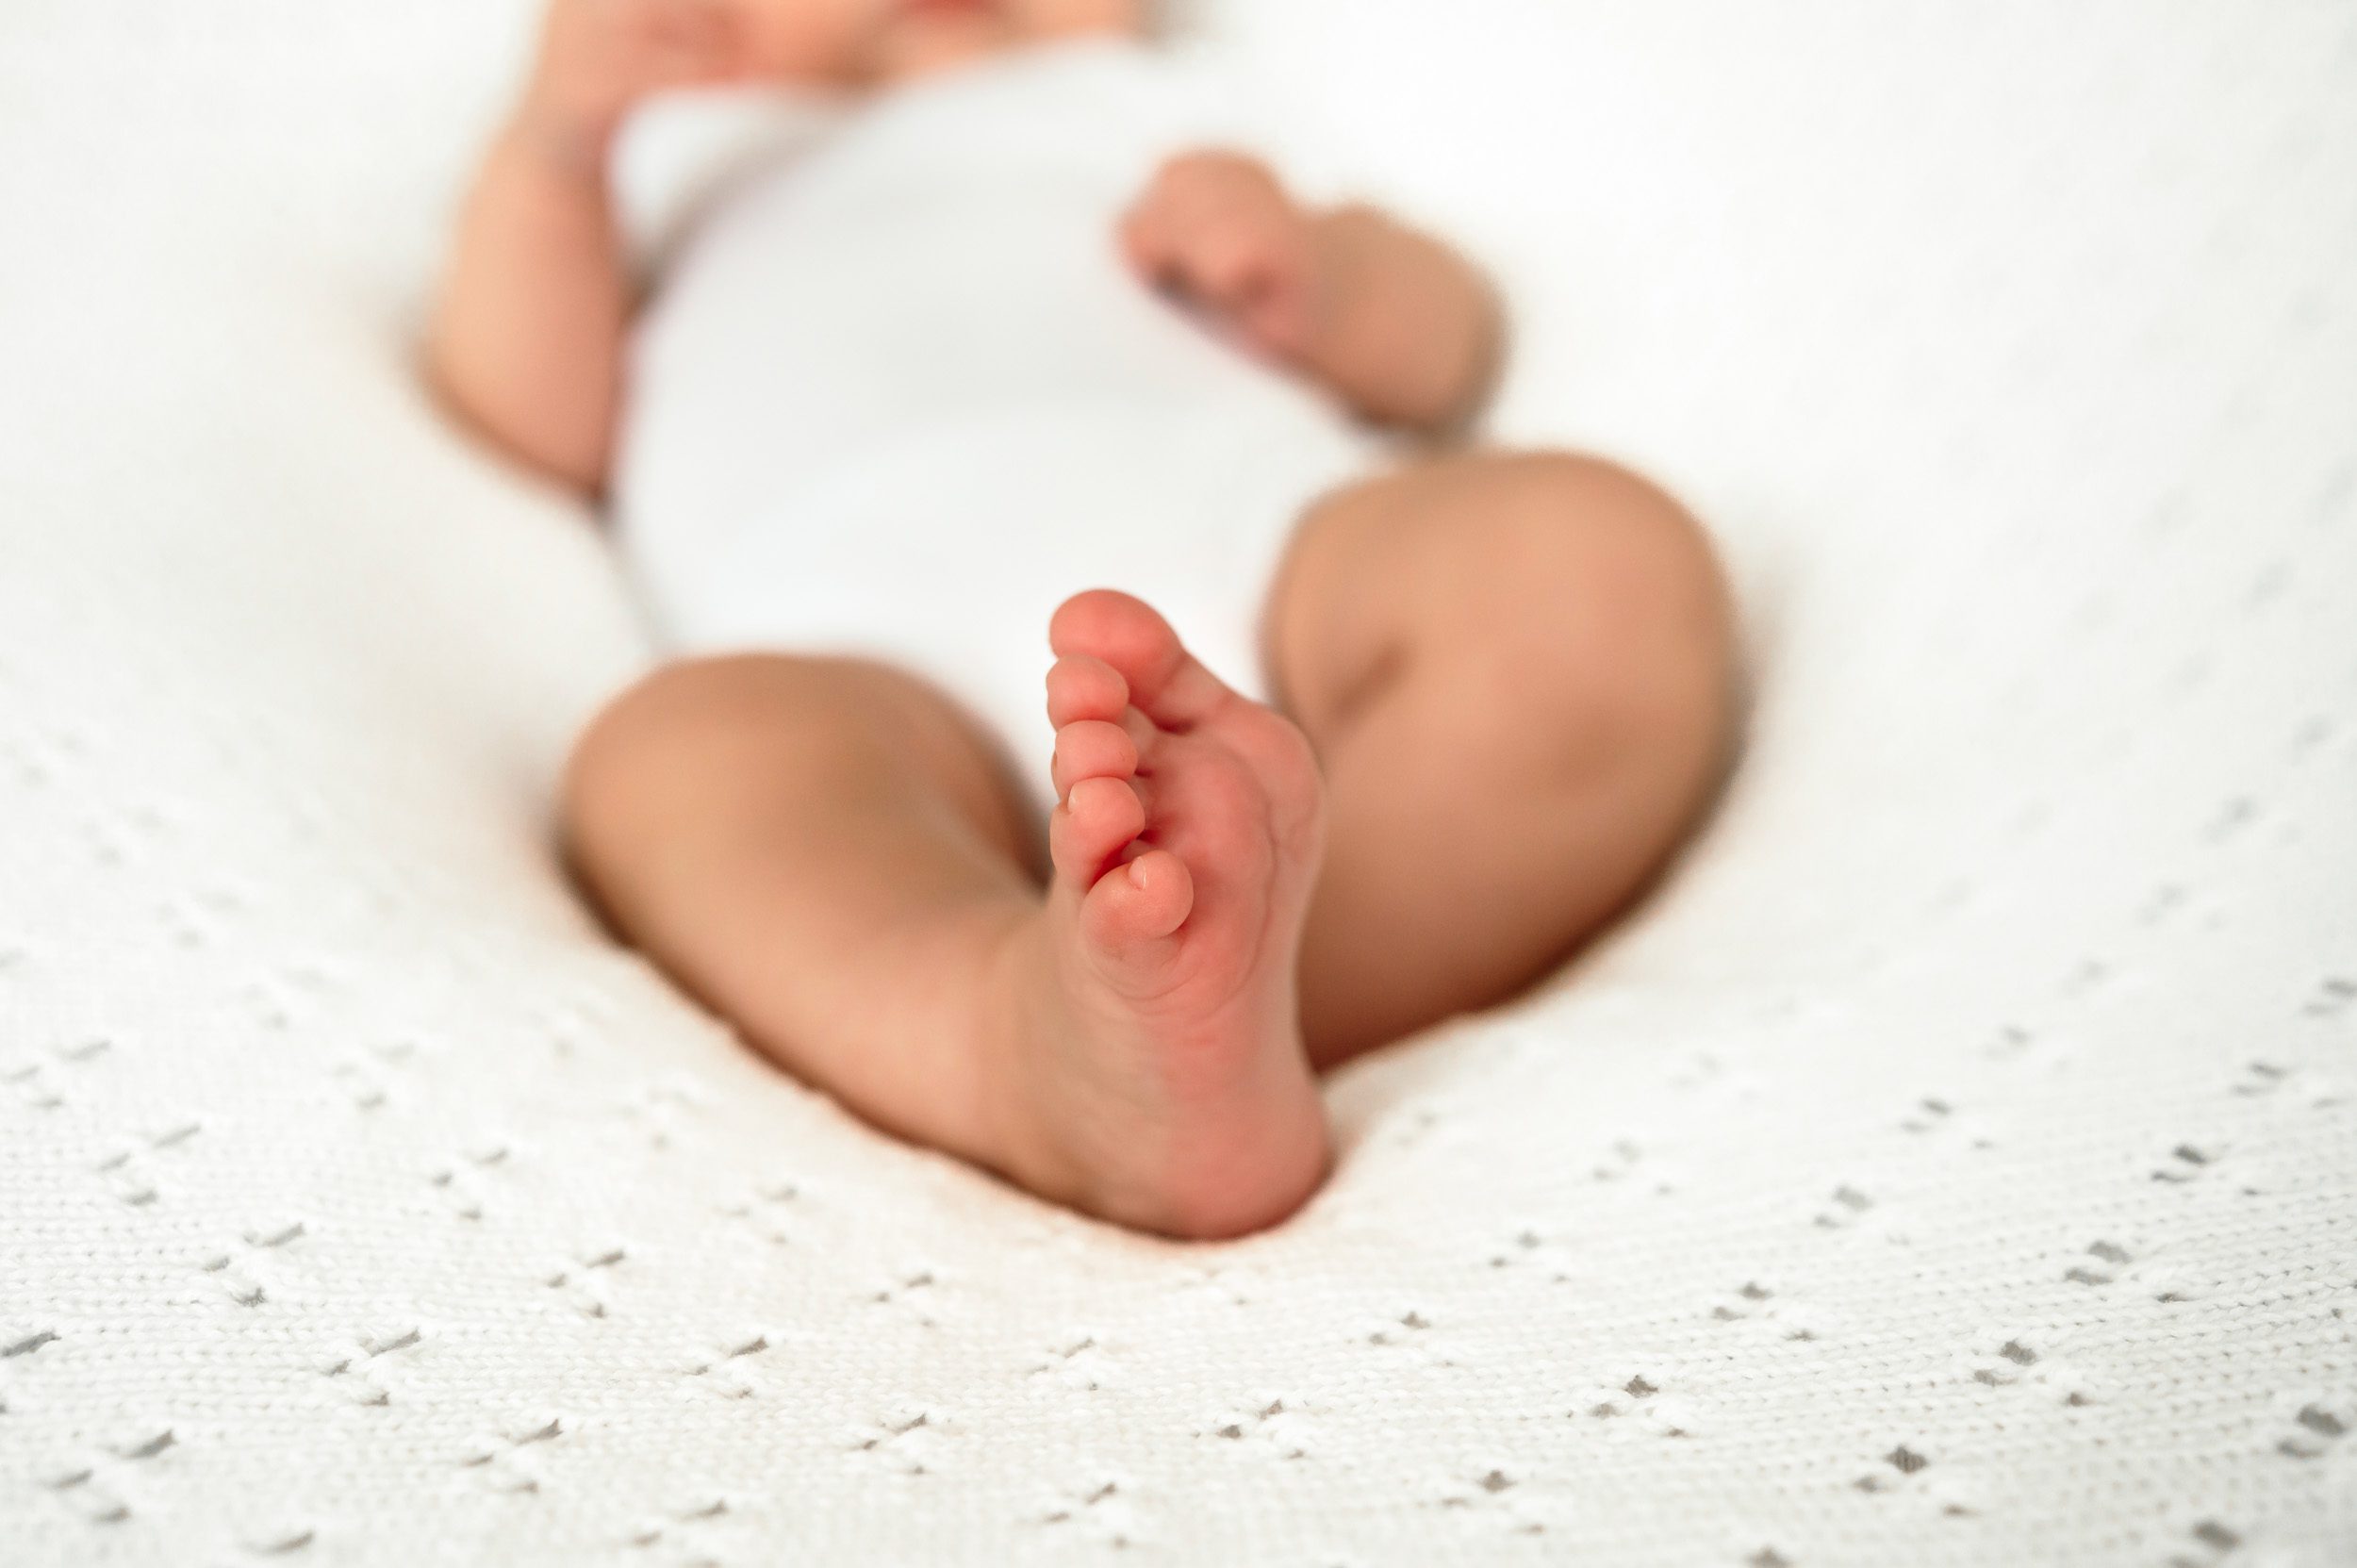 Close-up image of a newborn baby girl's toes during a natural newborn photo session